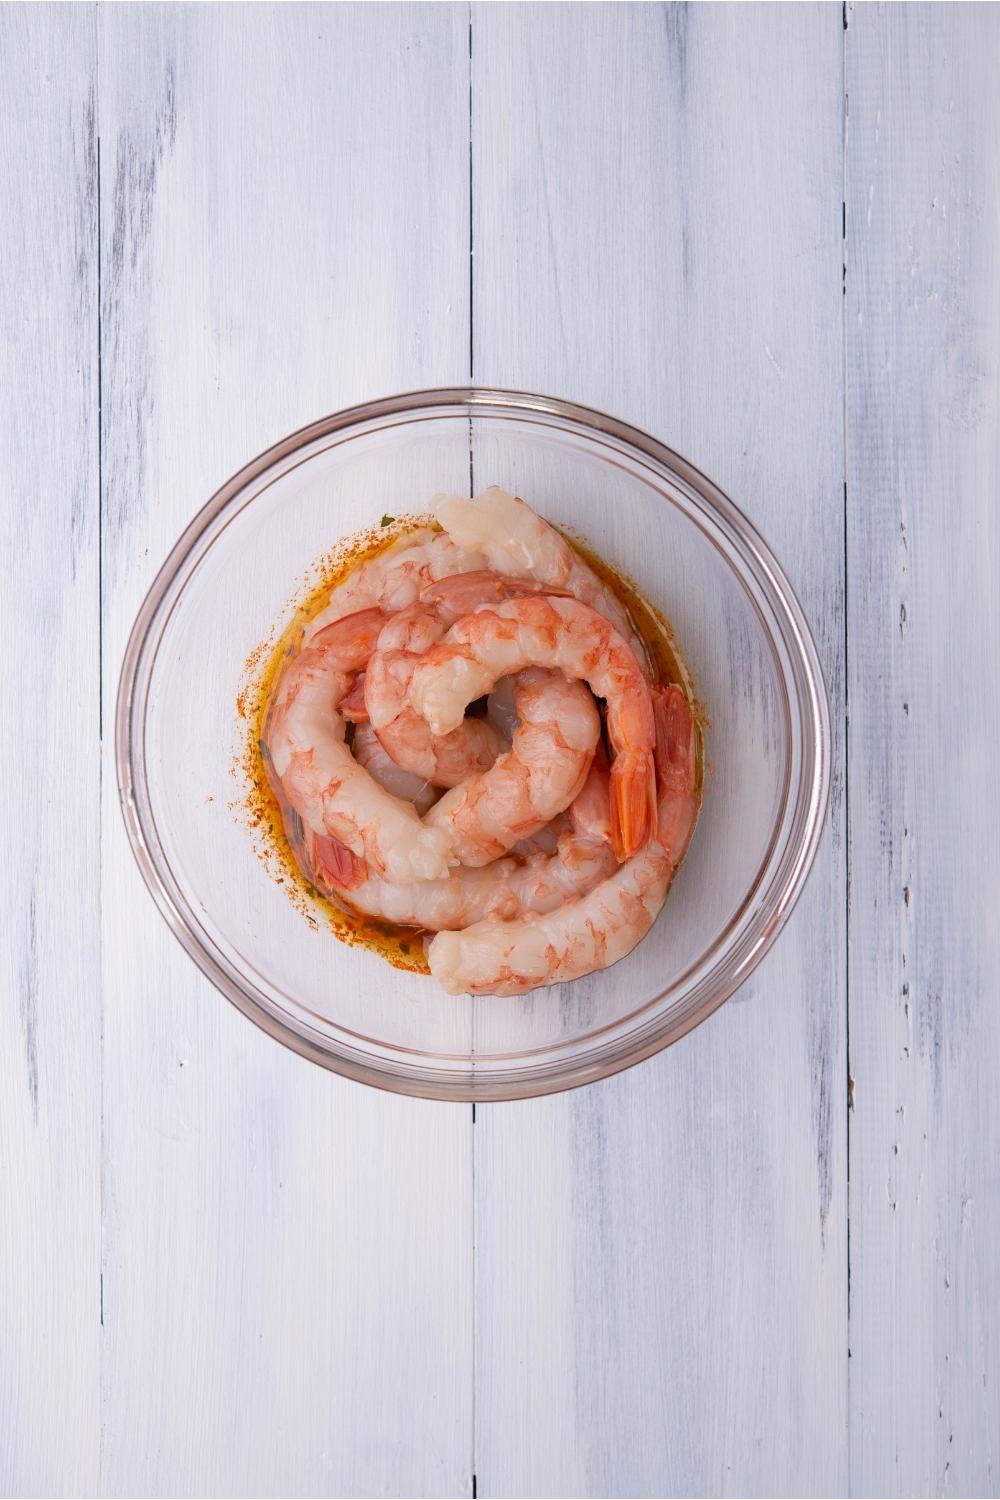 A clear bowl of raw shrimp in a marinade.